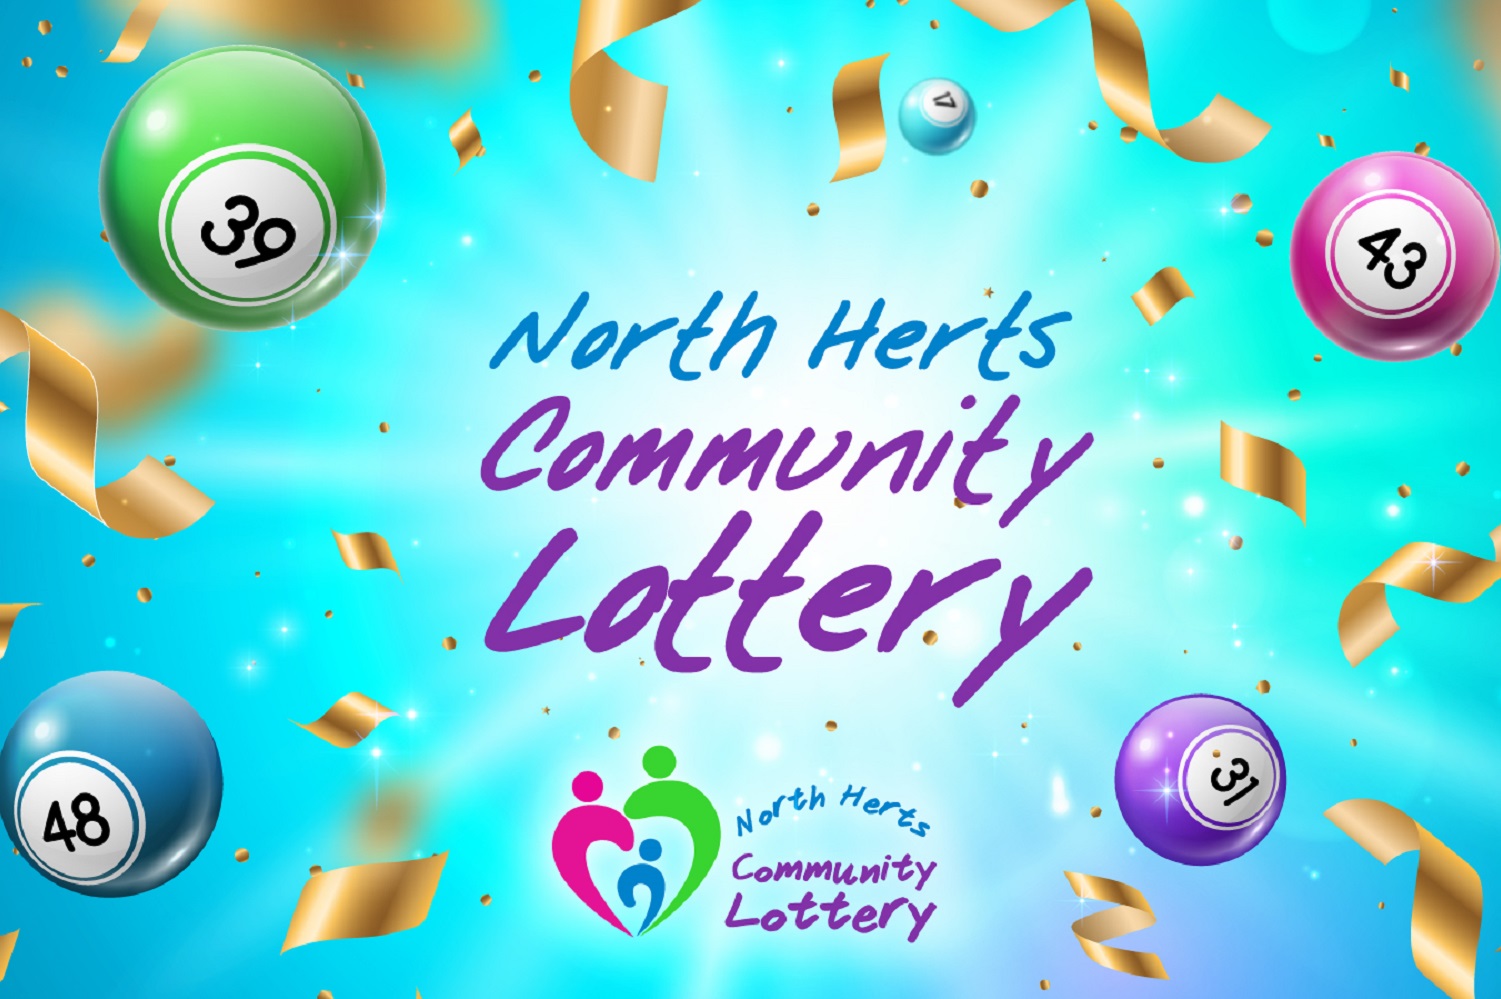 Lottery graphic with text and lottery balls